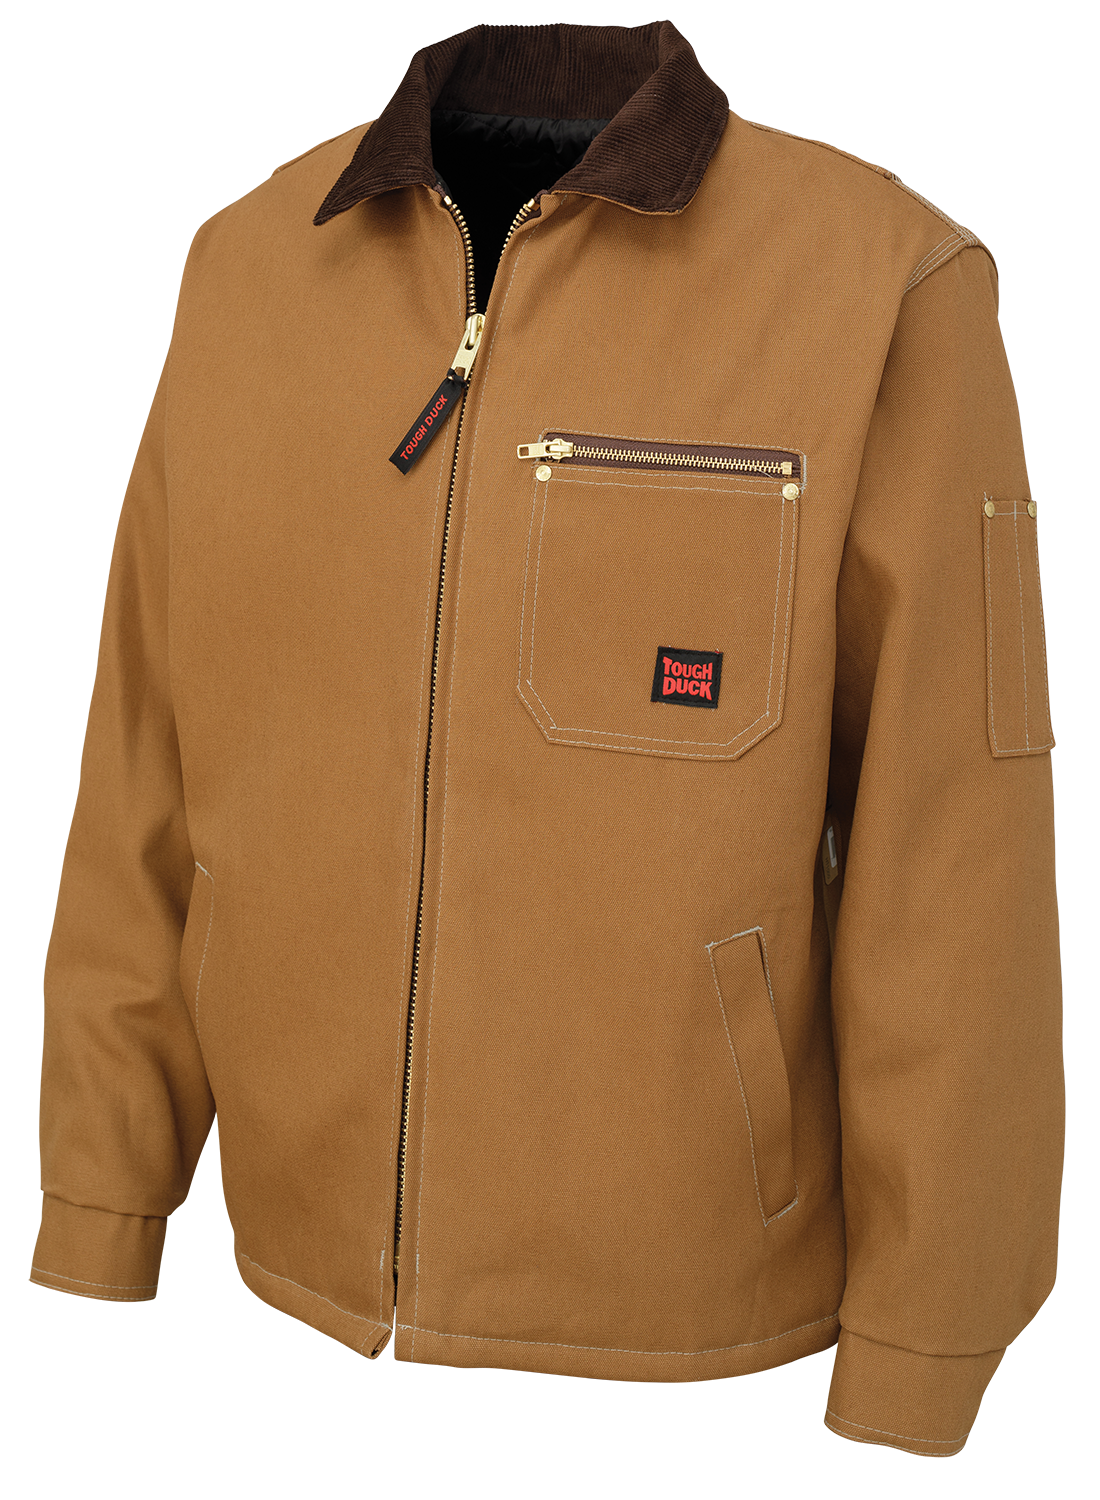 Tough Duck Workwear: Building Tough Gear for 80 Years - Full